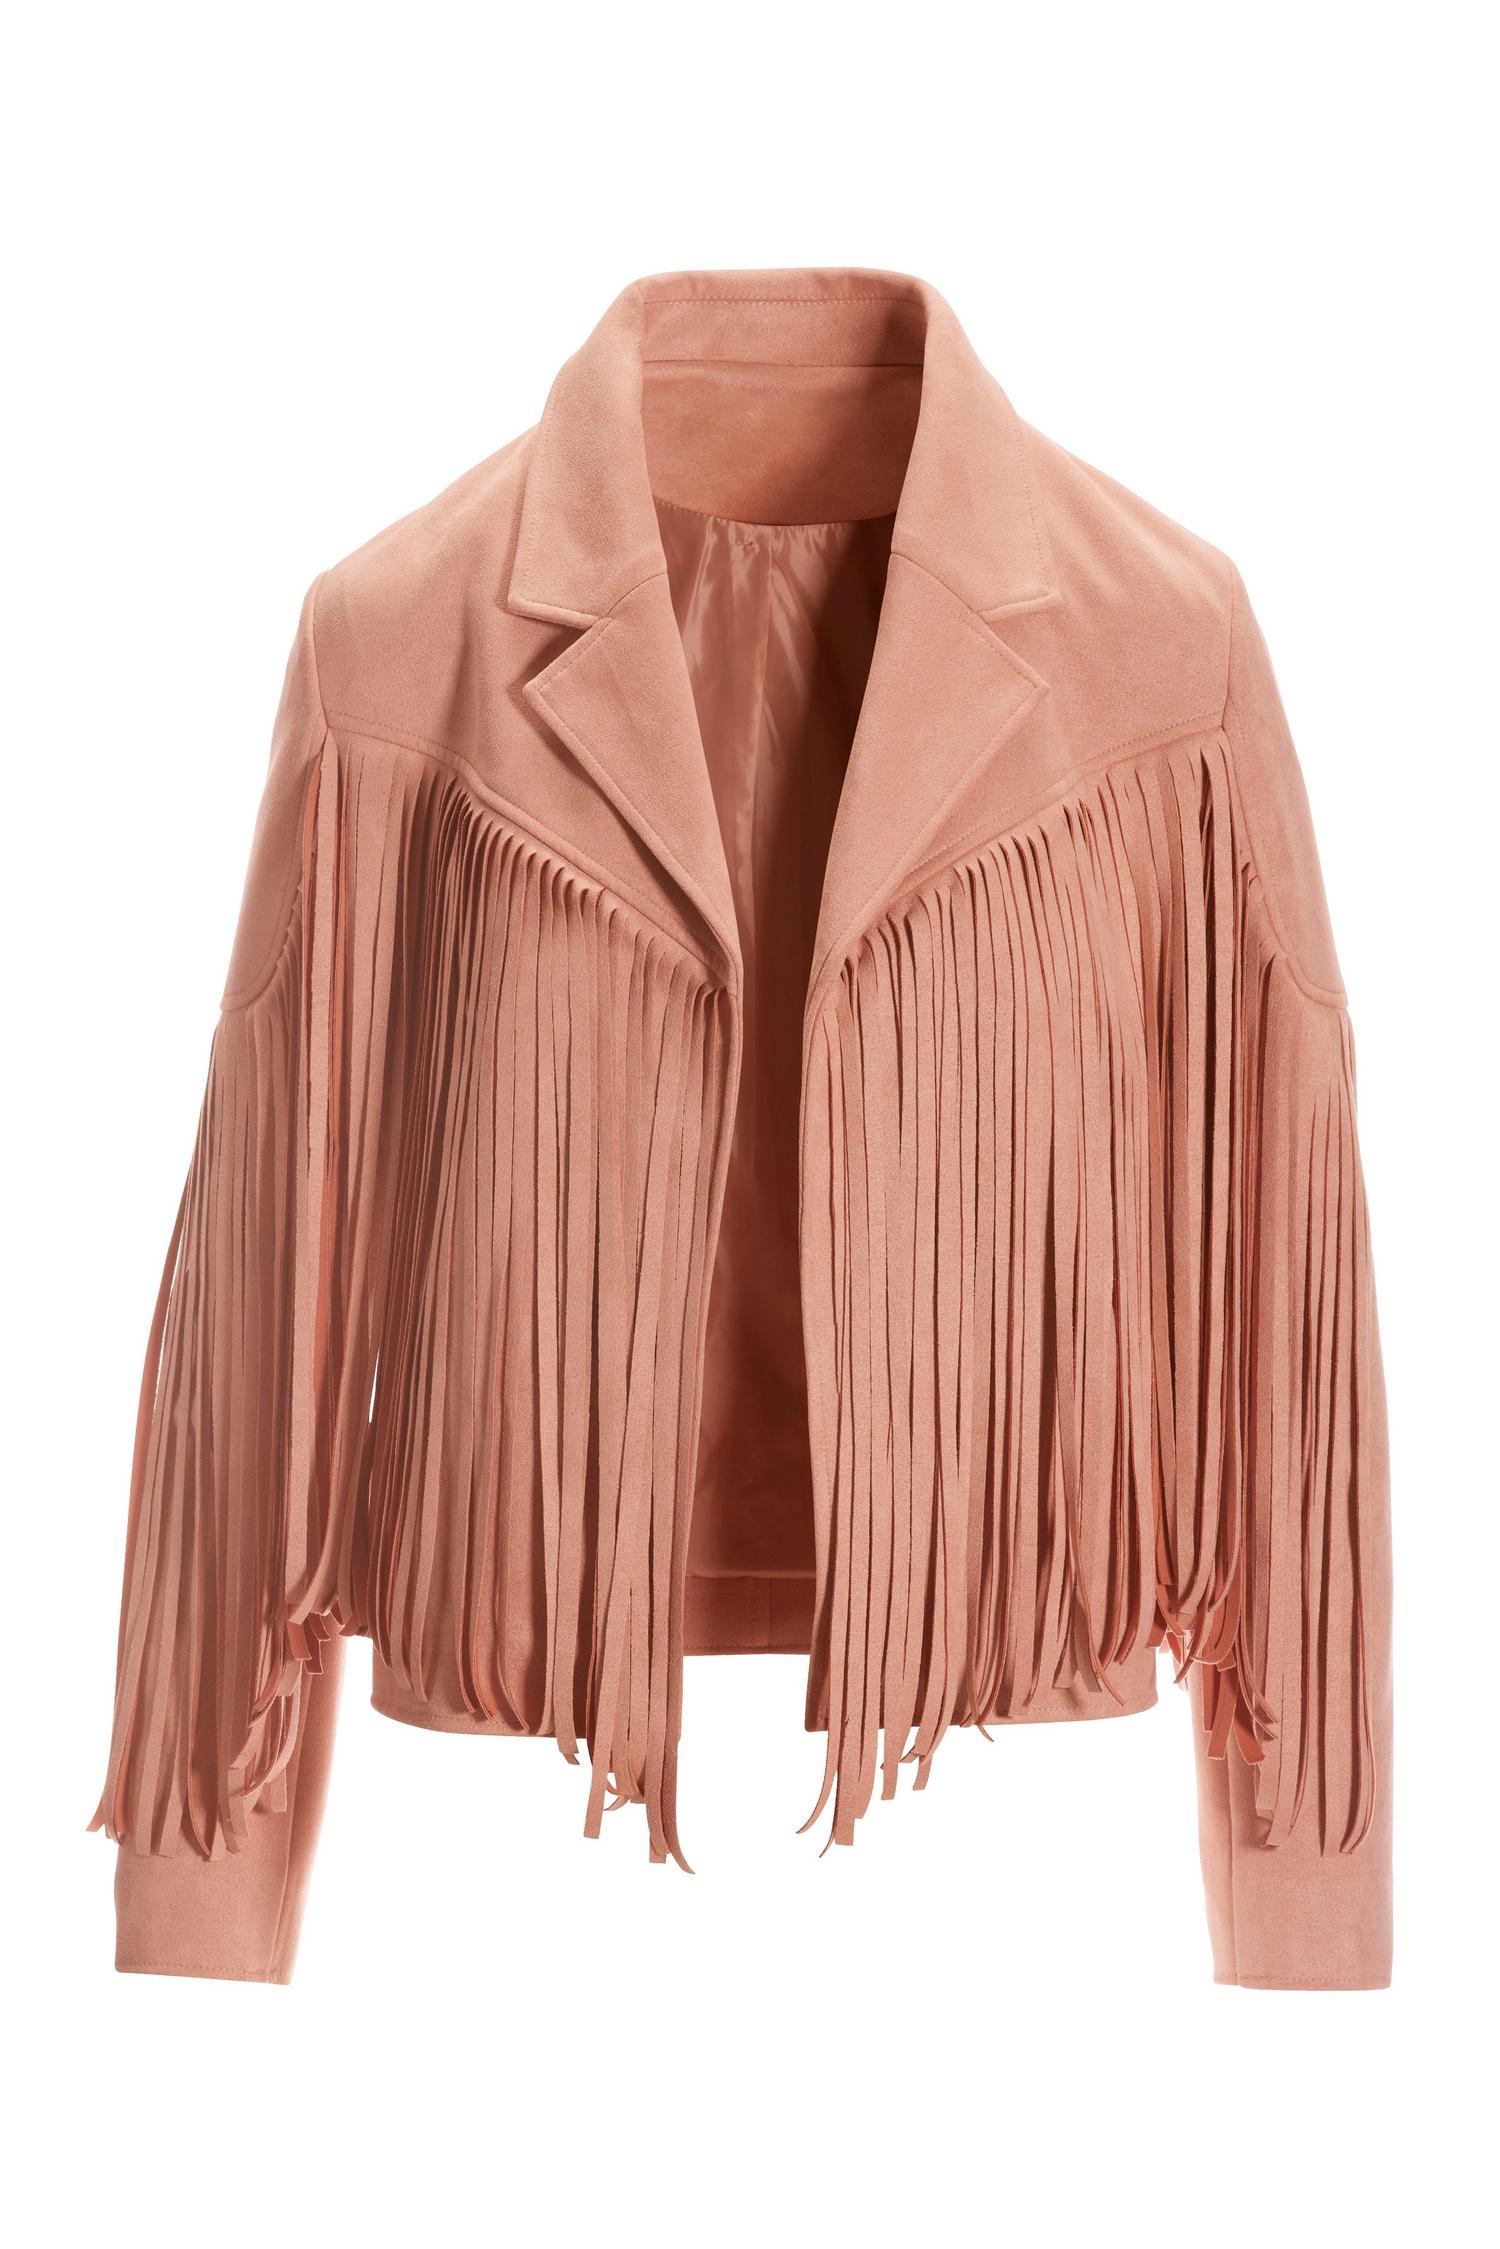 Fiji tan - Boho luxe suede fringe shawl and leather jeackets